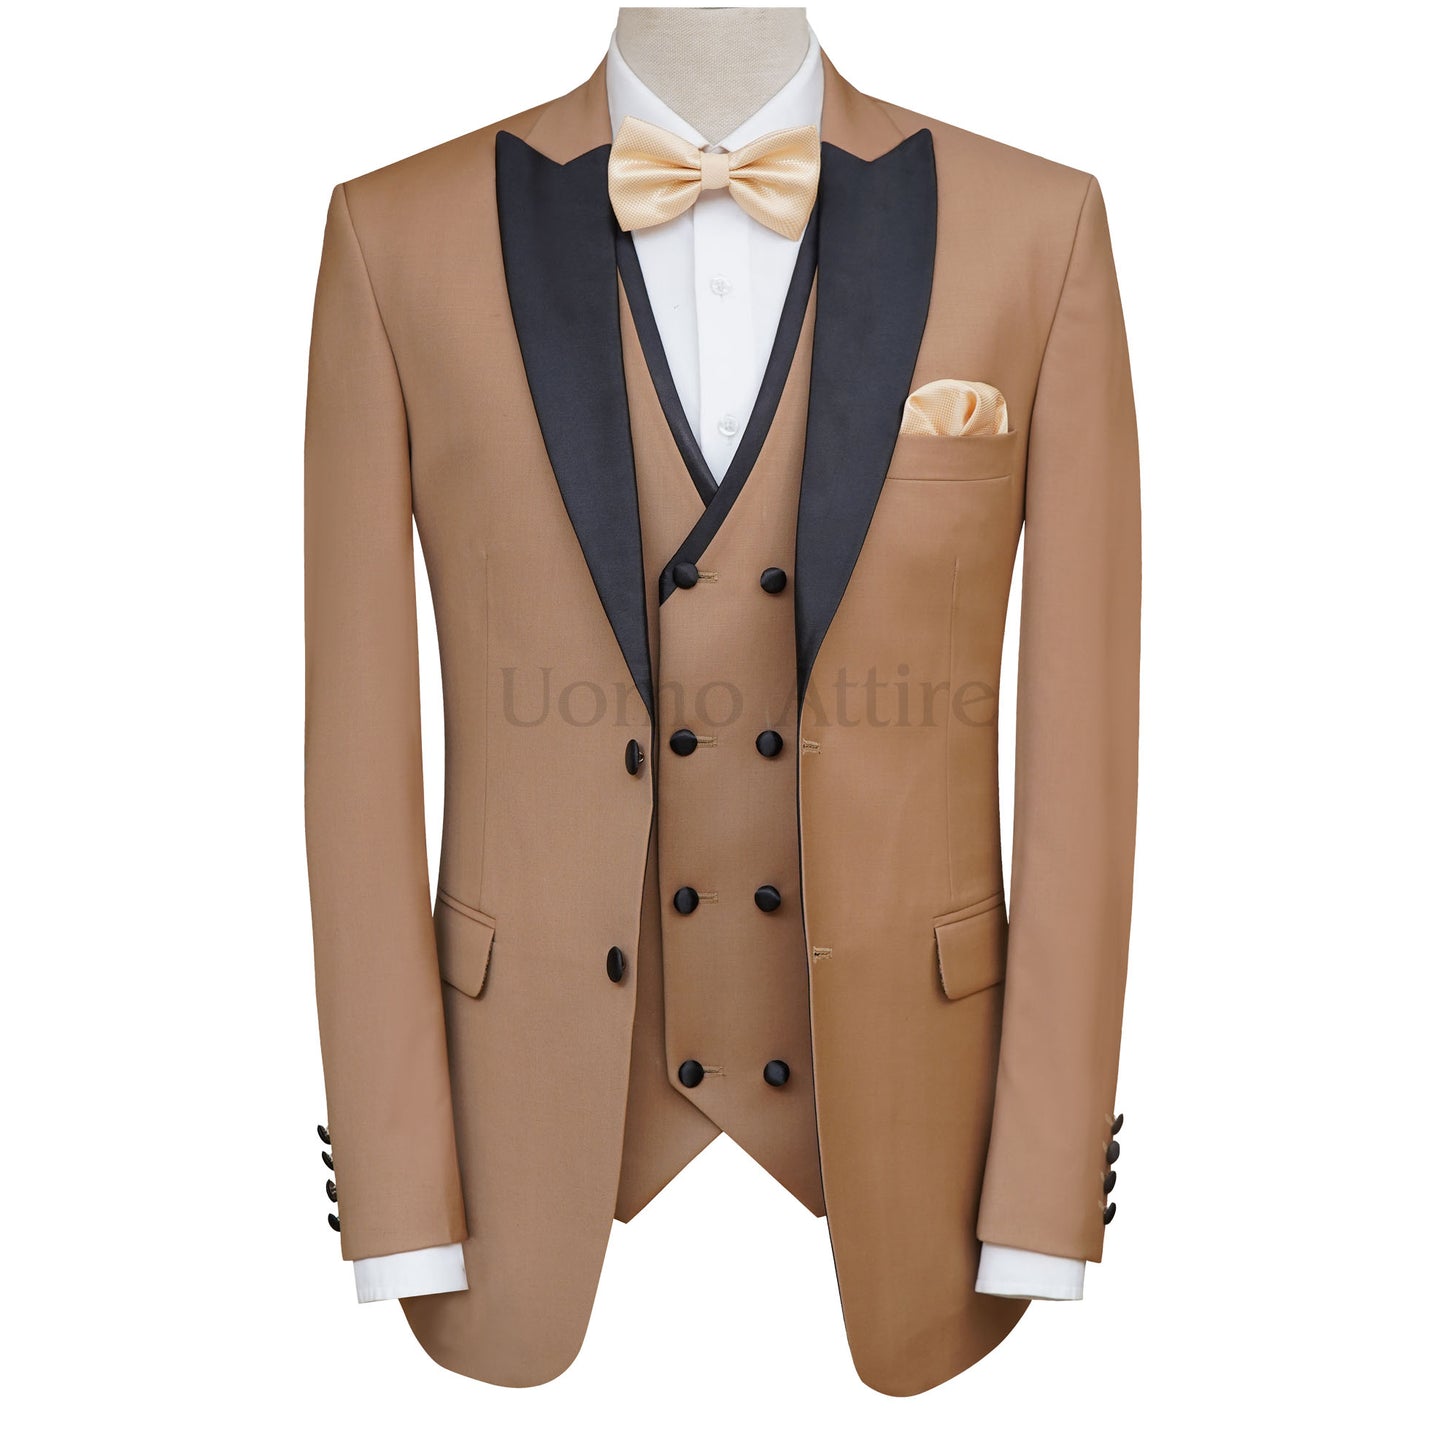 10 Tips for Buying the Perfect Wedding Suit for Men